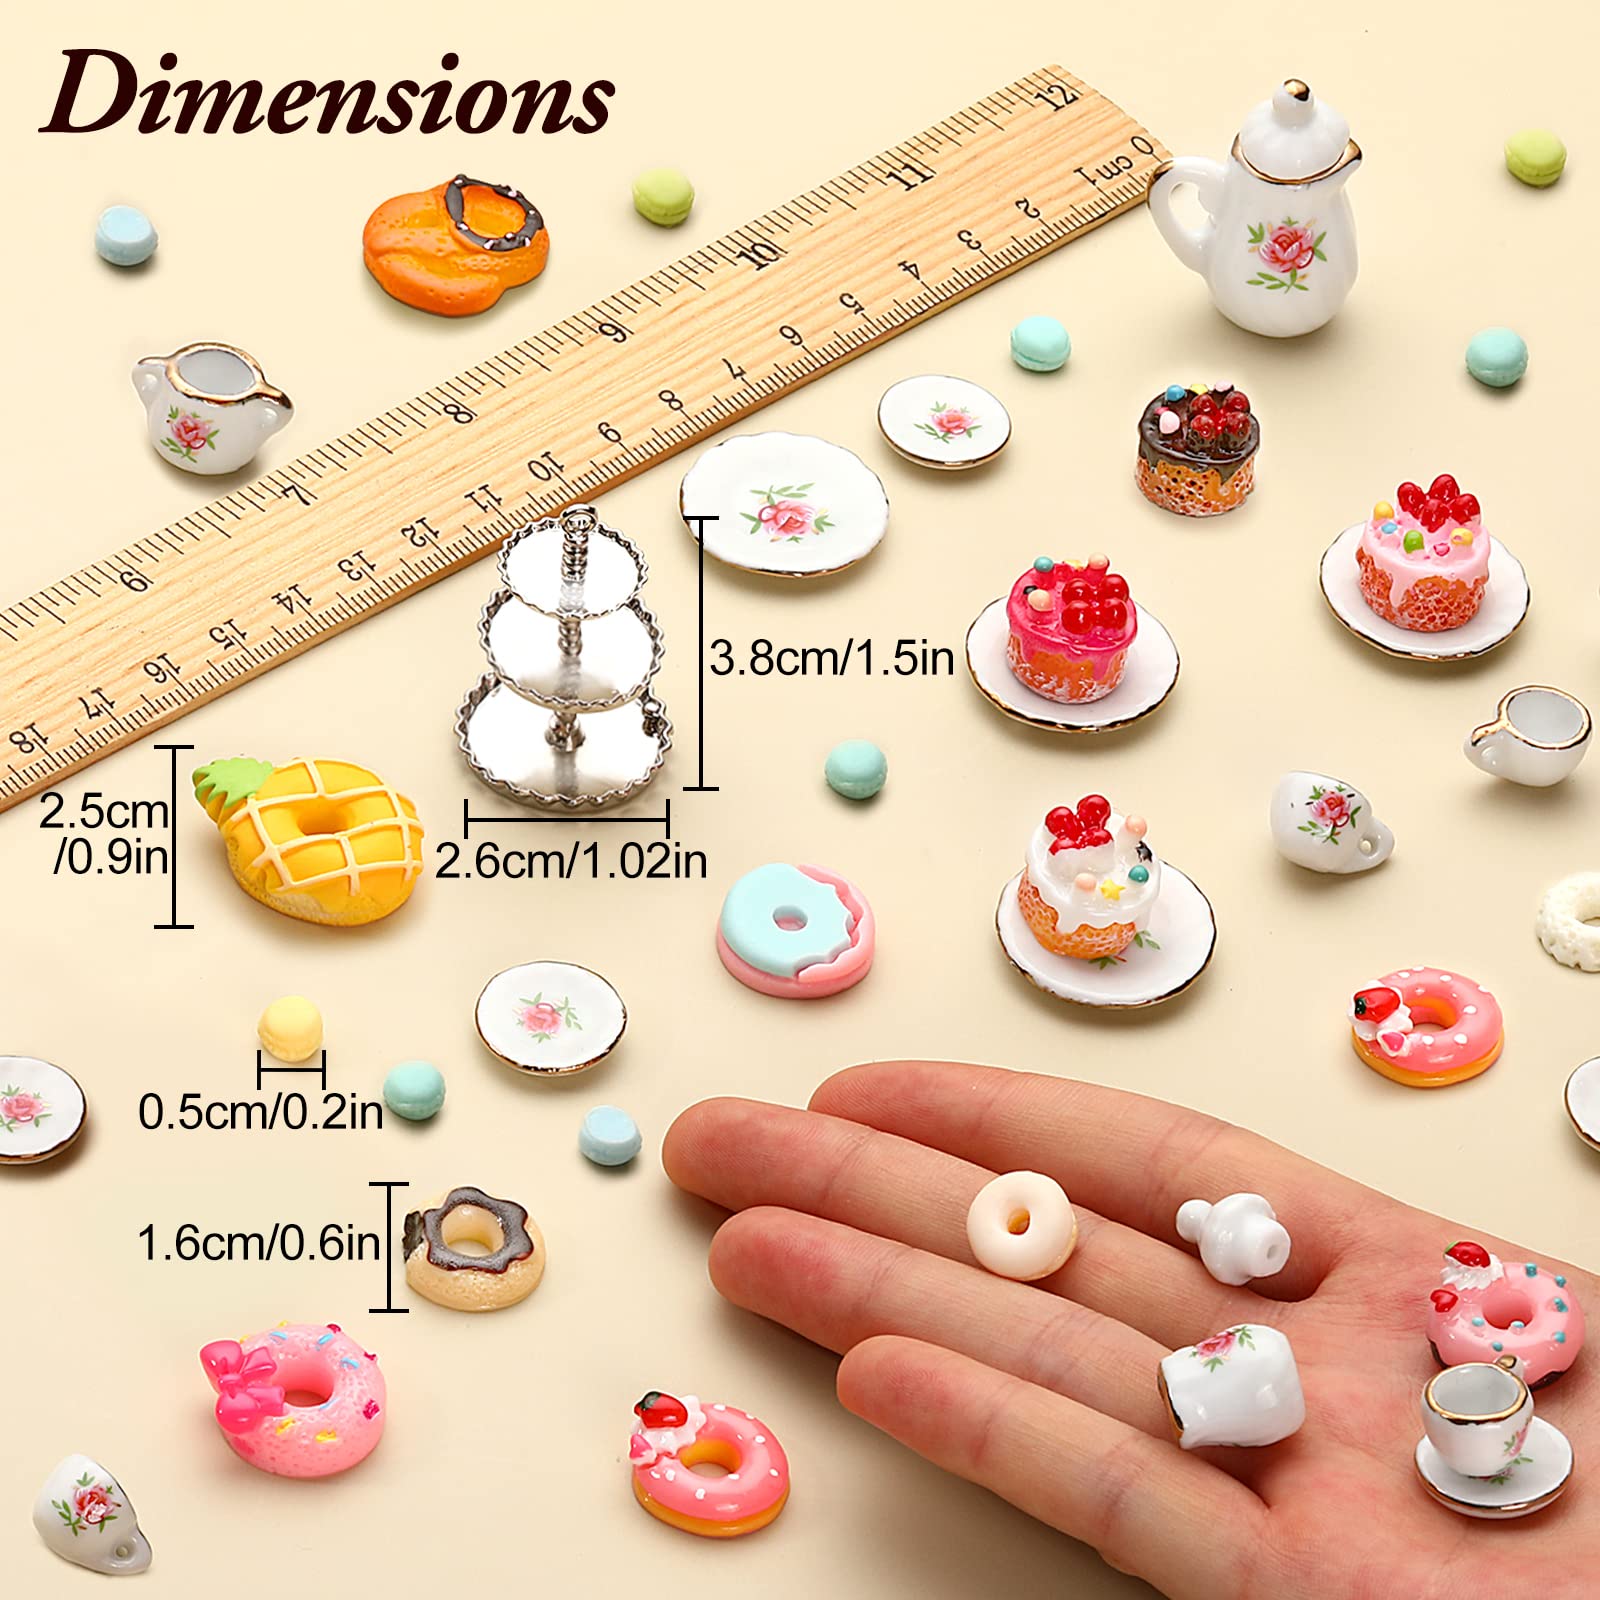 40 Pcs 1:12 Scale Dollhouse Miniature Kitchen Accessories Set Includes 15 Flower Pattern Porcelain Tea Cup 24 Mixed Pretend Cake Foods 1 Mini Three-Tier Cake Stand for Decor Supply (Sweet Style)